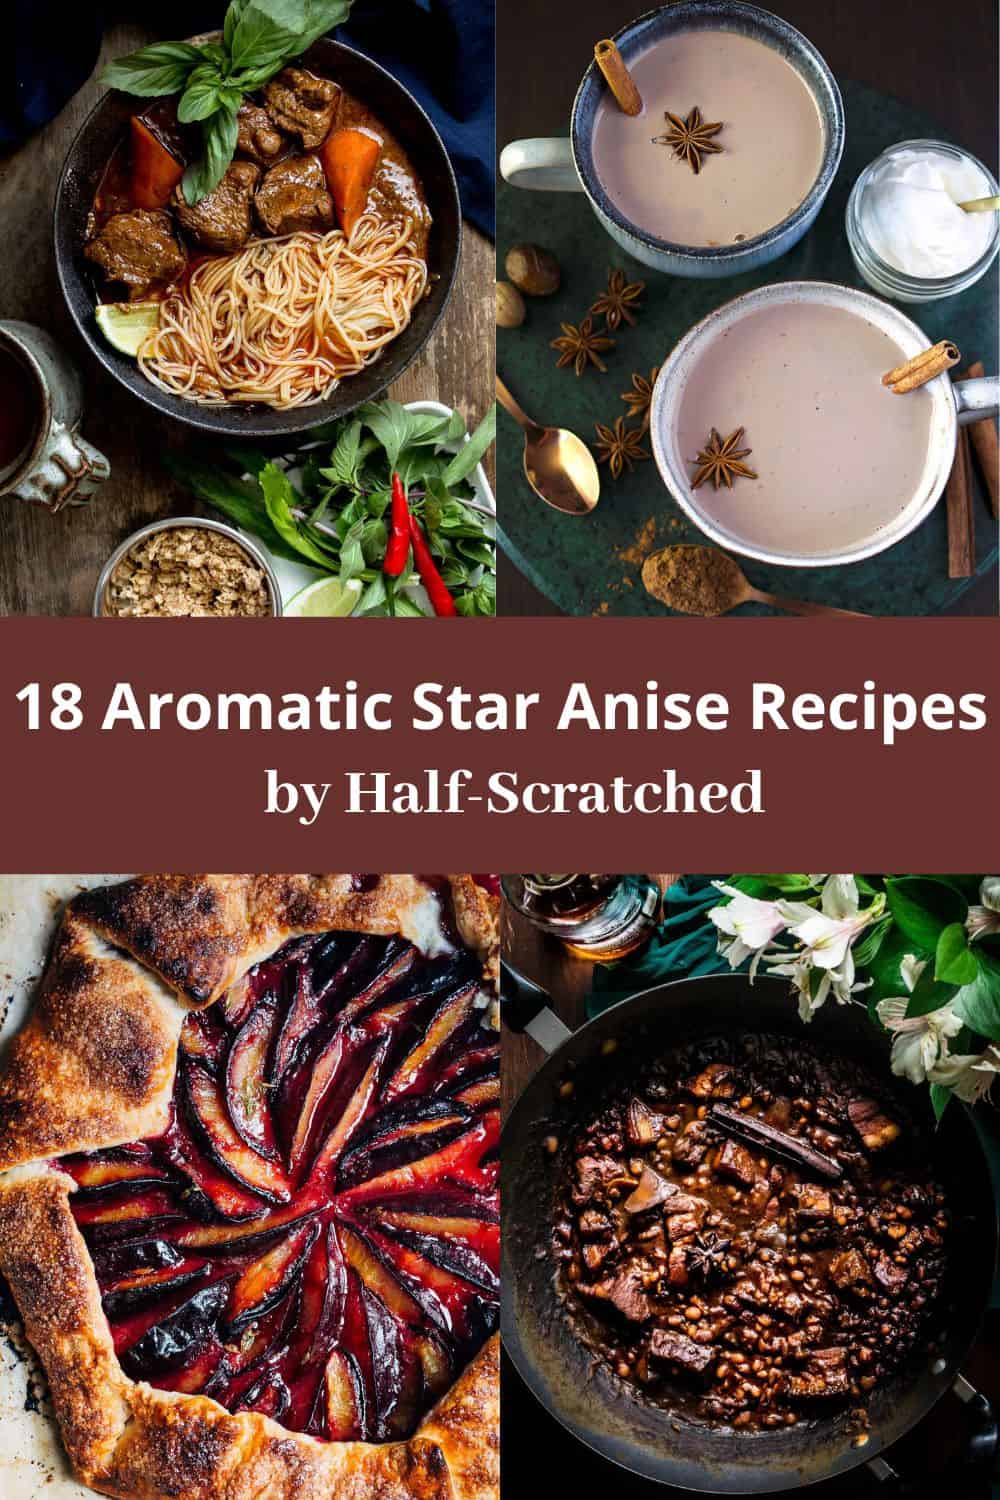 18 Aromatic Star Anise Recipes